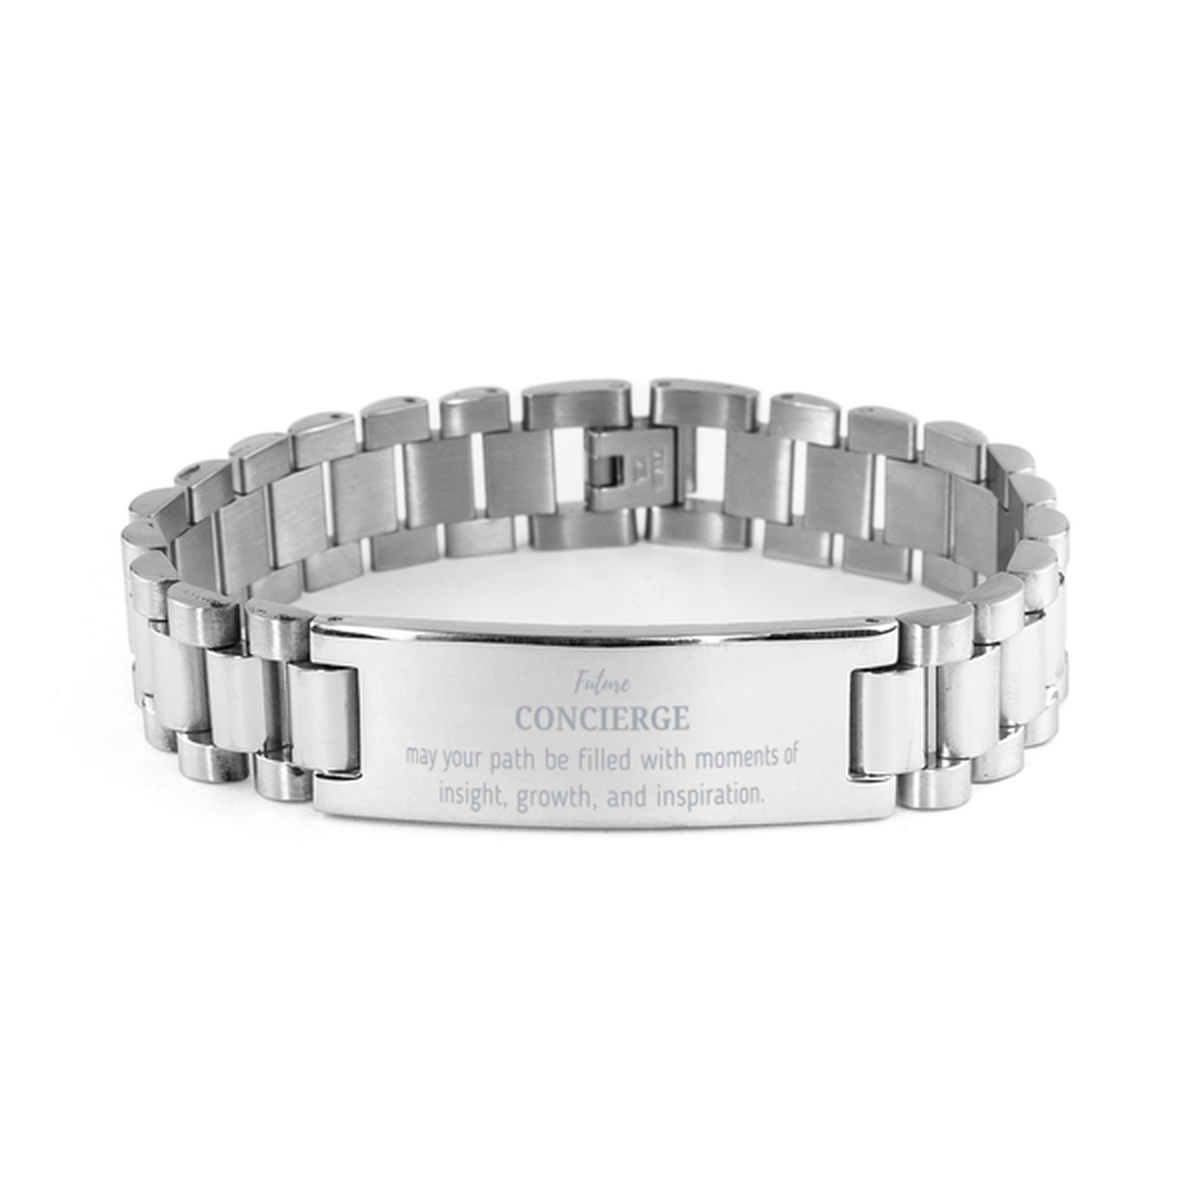 Future Concierge Gifts, May your path be filled with moments of insight, Graduation Gifts for New Concierge, Christmas Unique Ladder Stainless Steel Bracelet For Men, Women, Friends